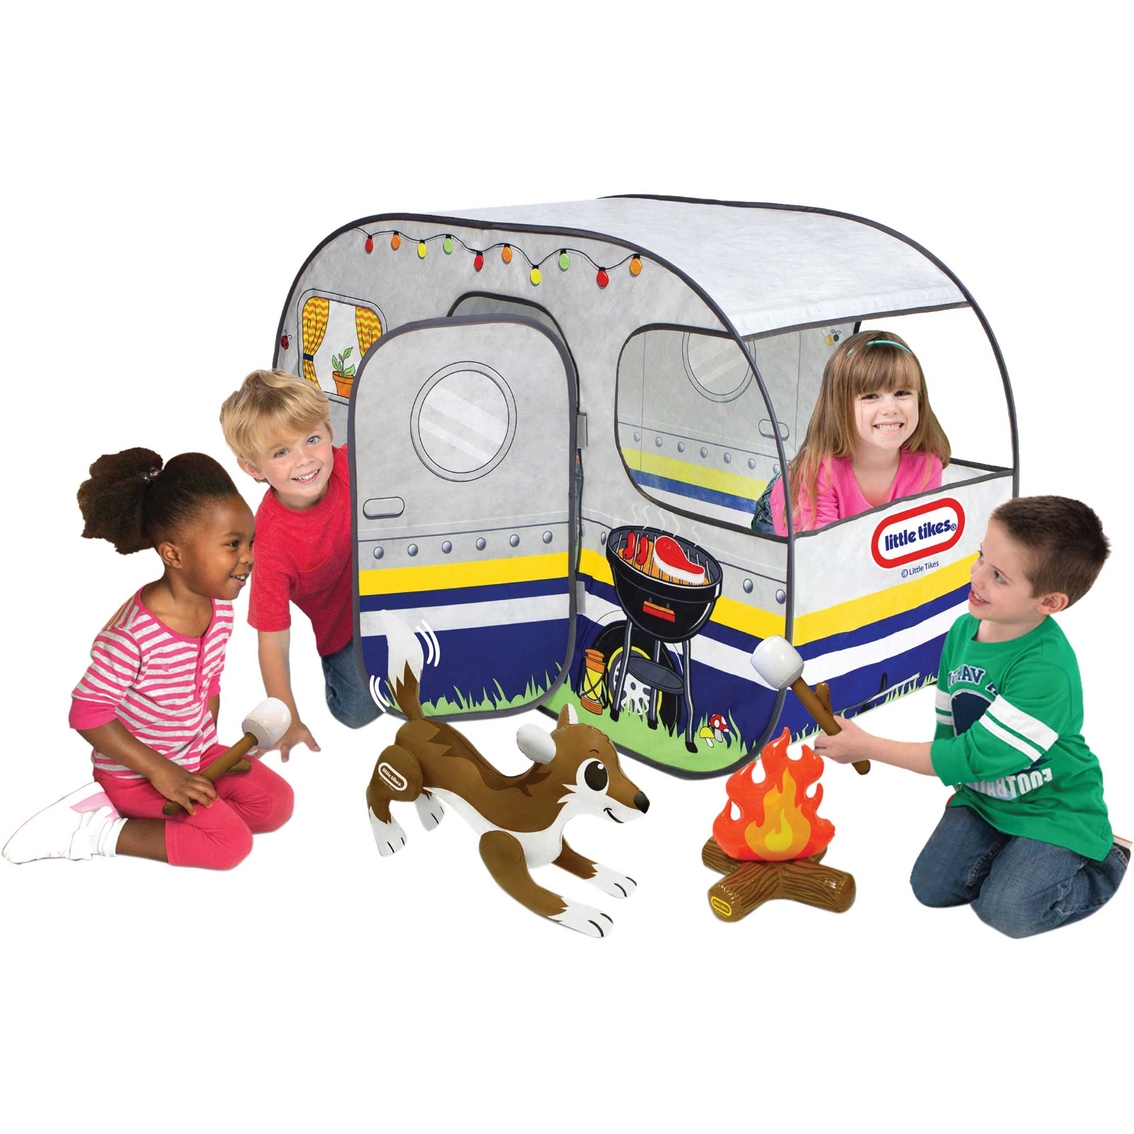 Little Tikes RV Camper Tent Pretend Play Ty - Image 3 of 4